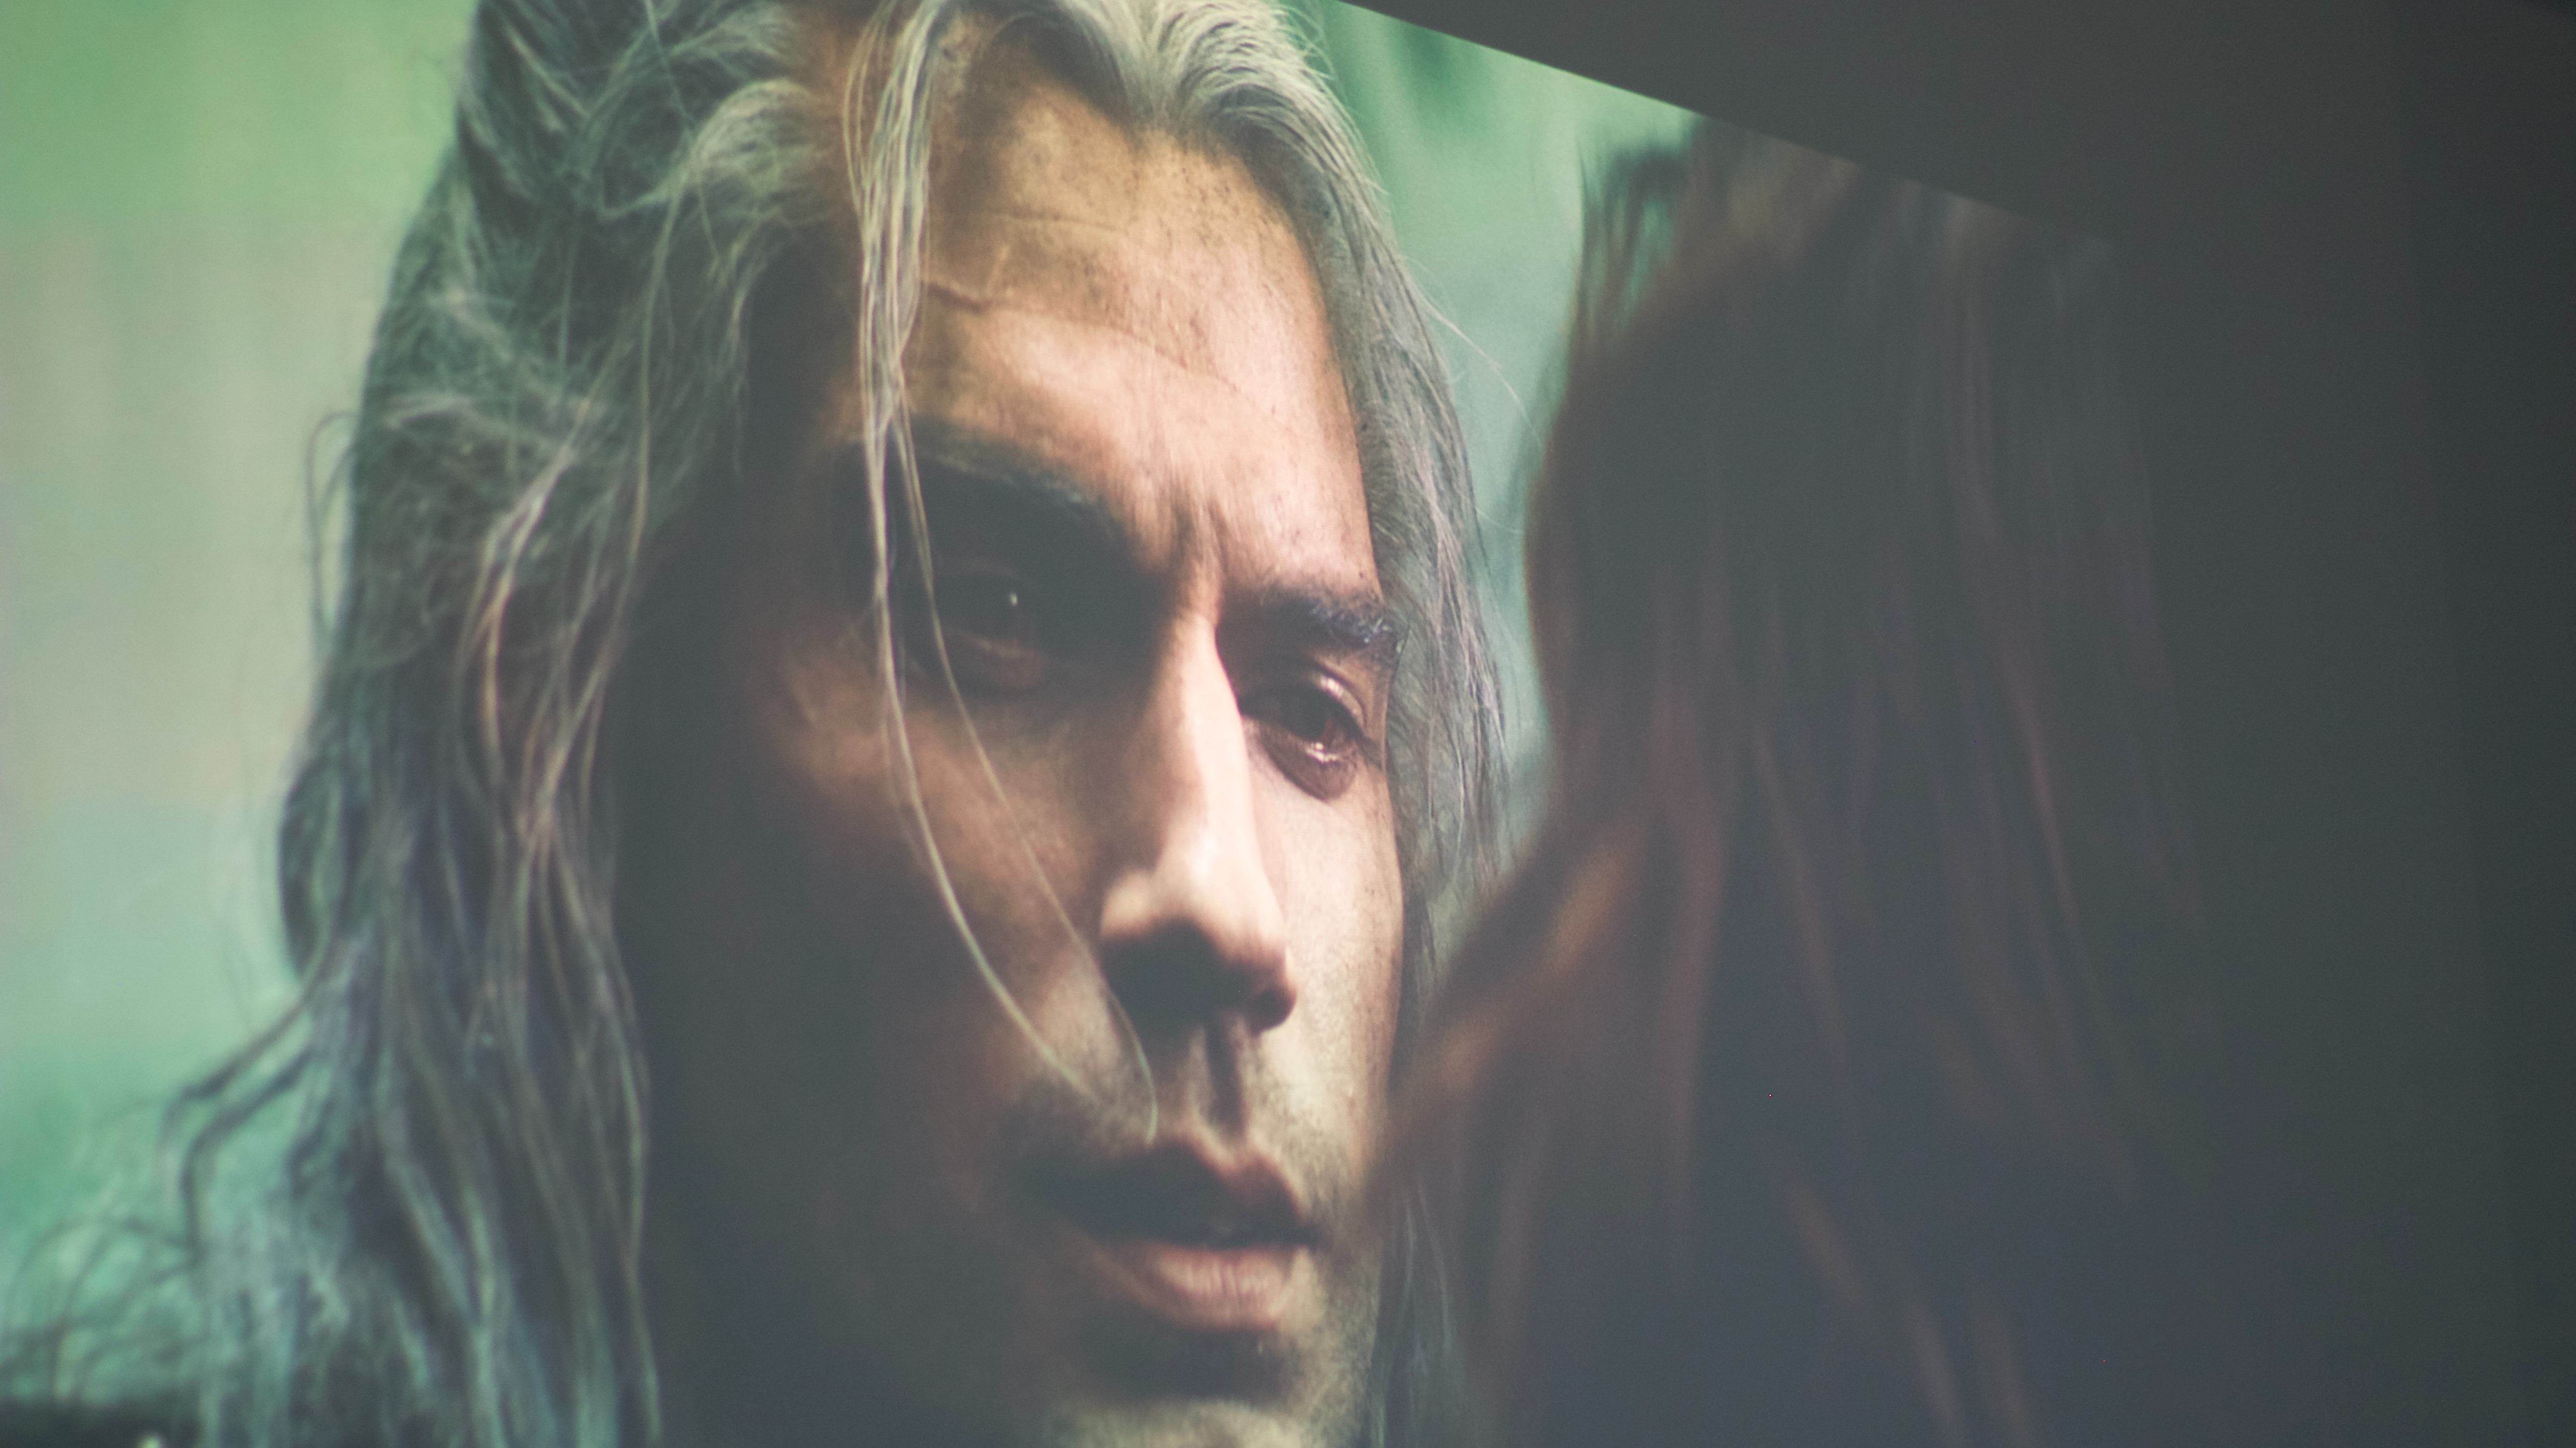 Geralt from the witcher cast on a projector screen